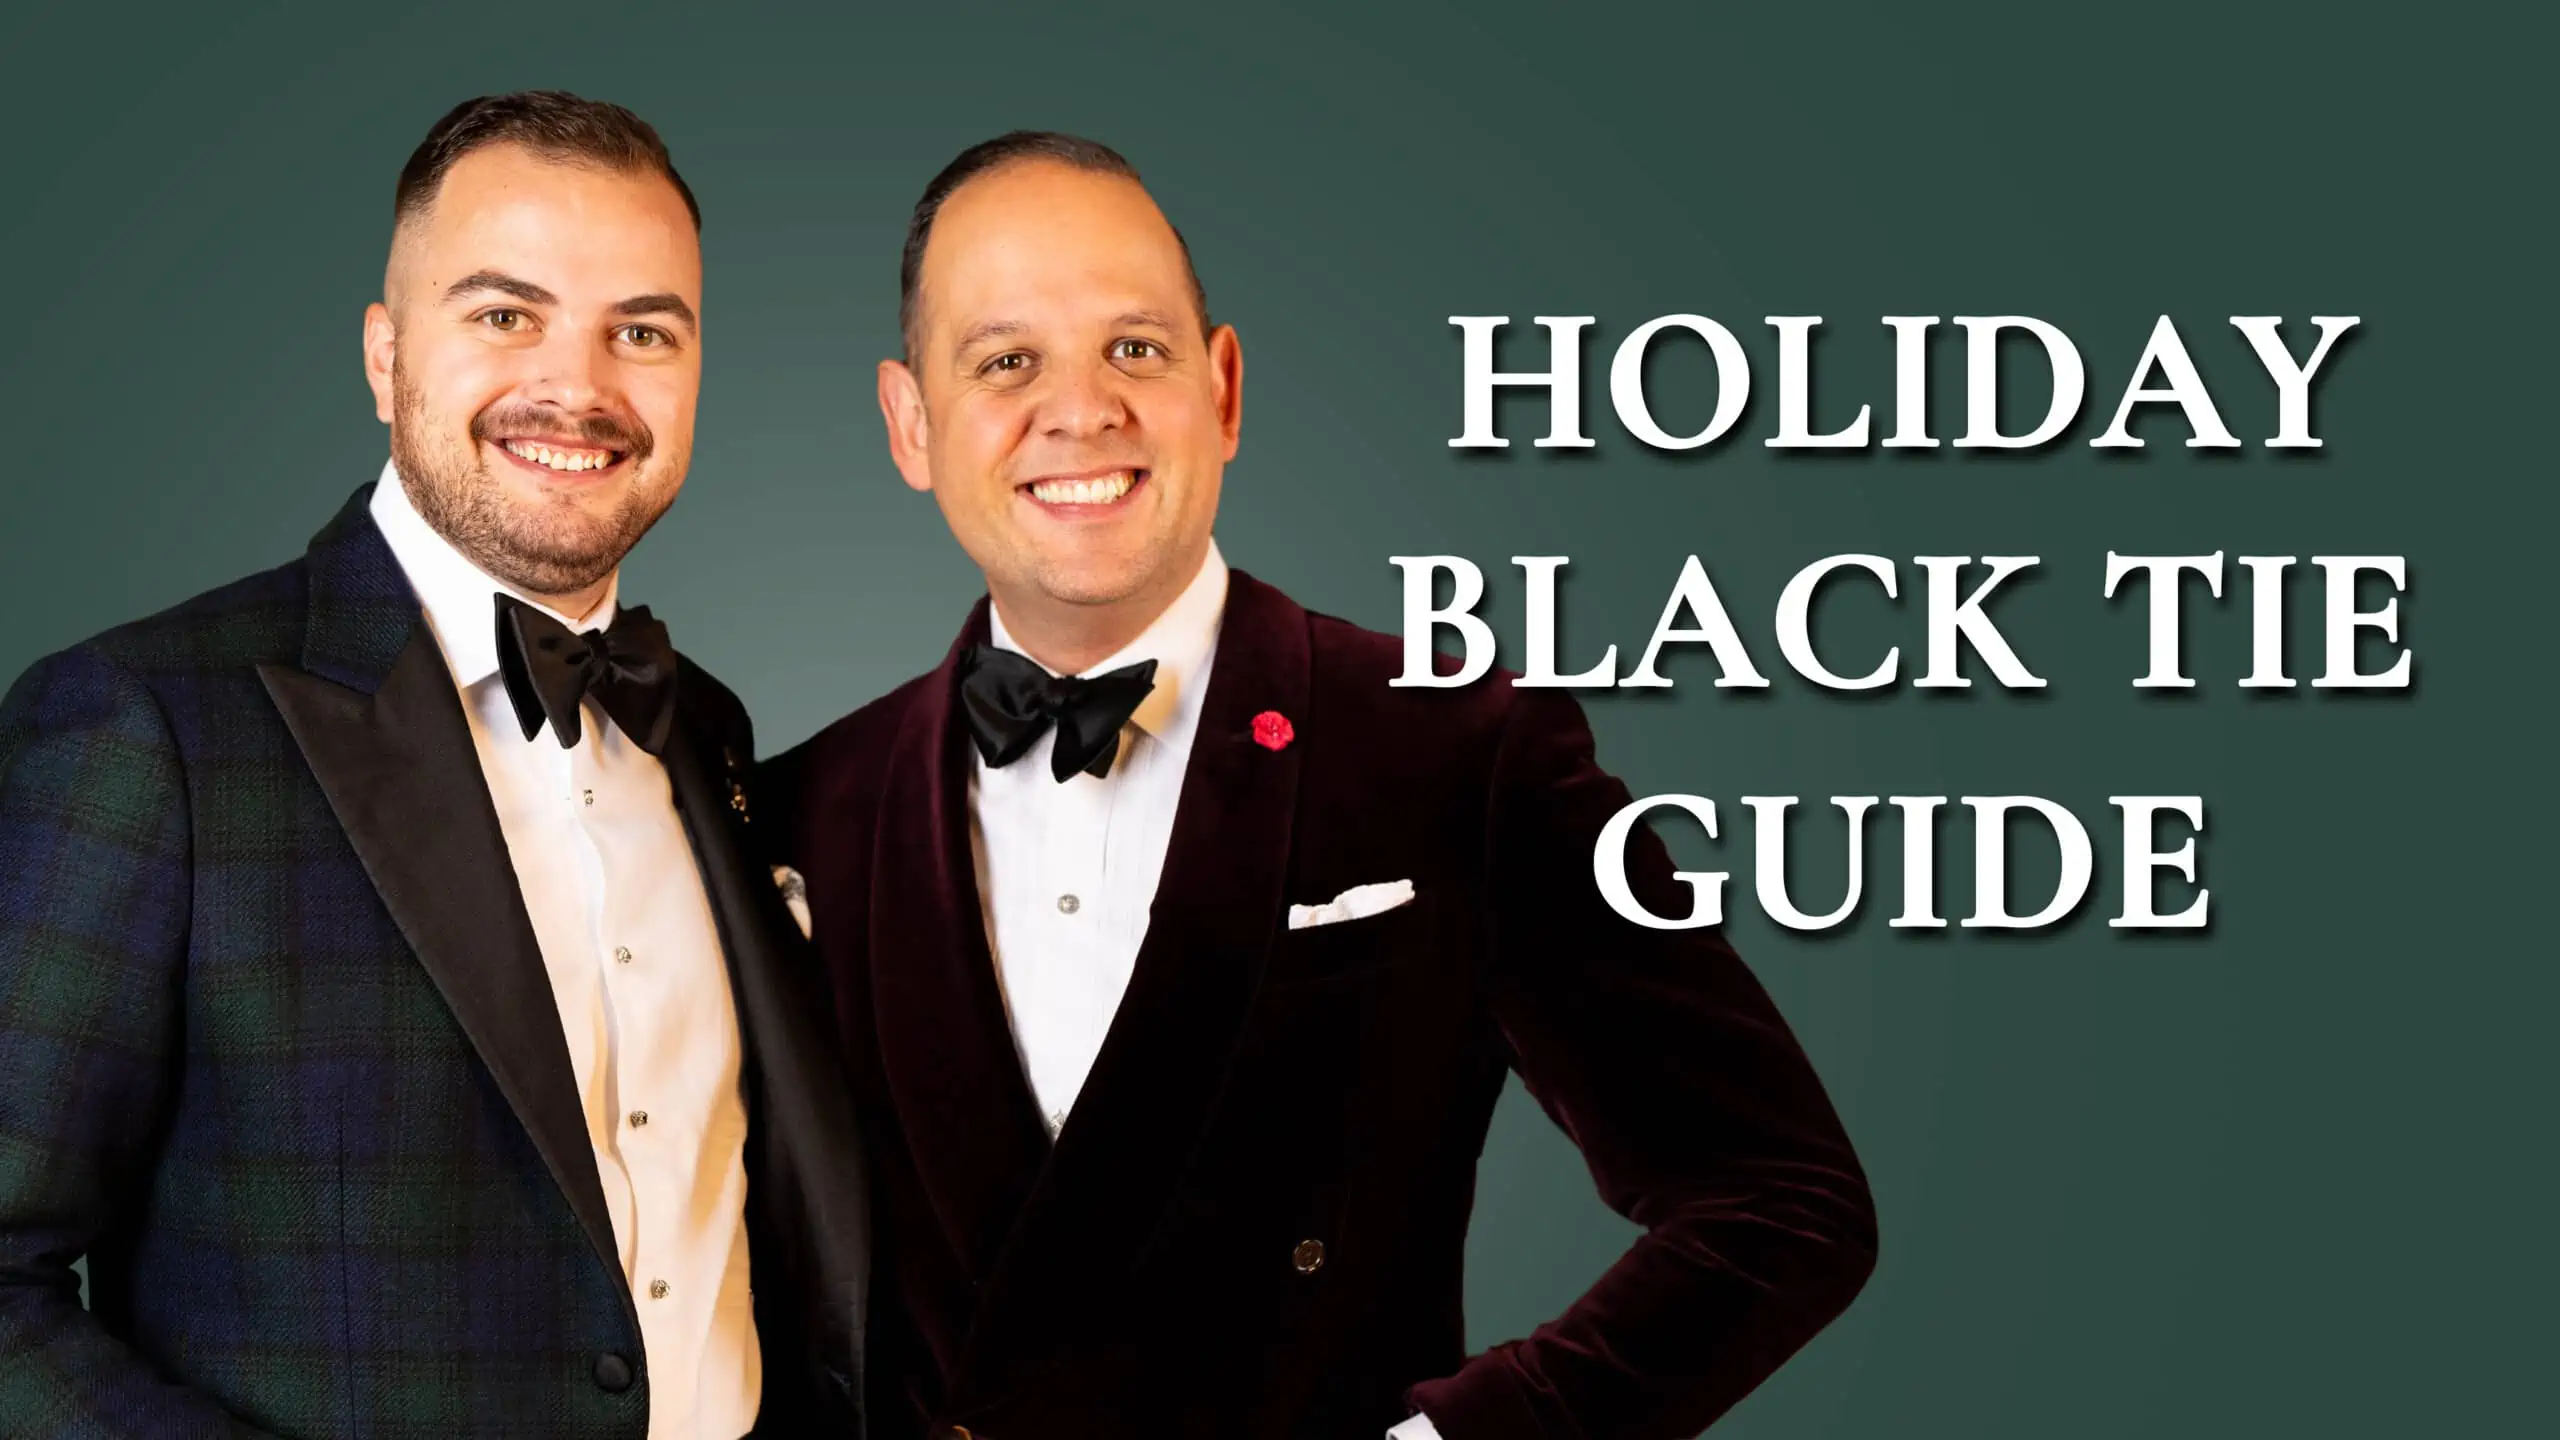 Holiday Black Tie Guide 3840x2160 wp scaled